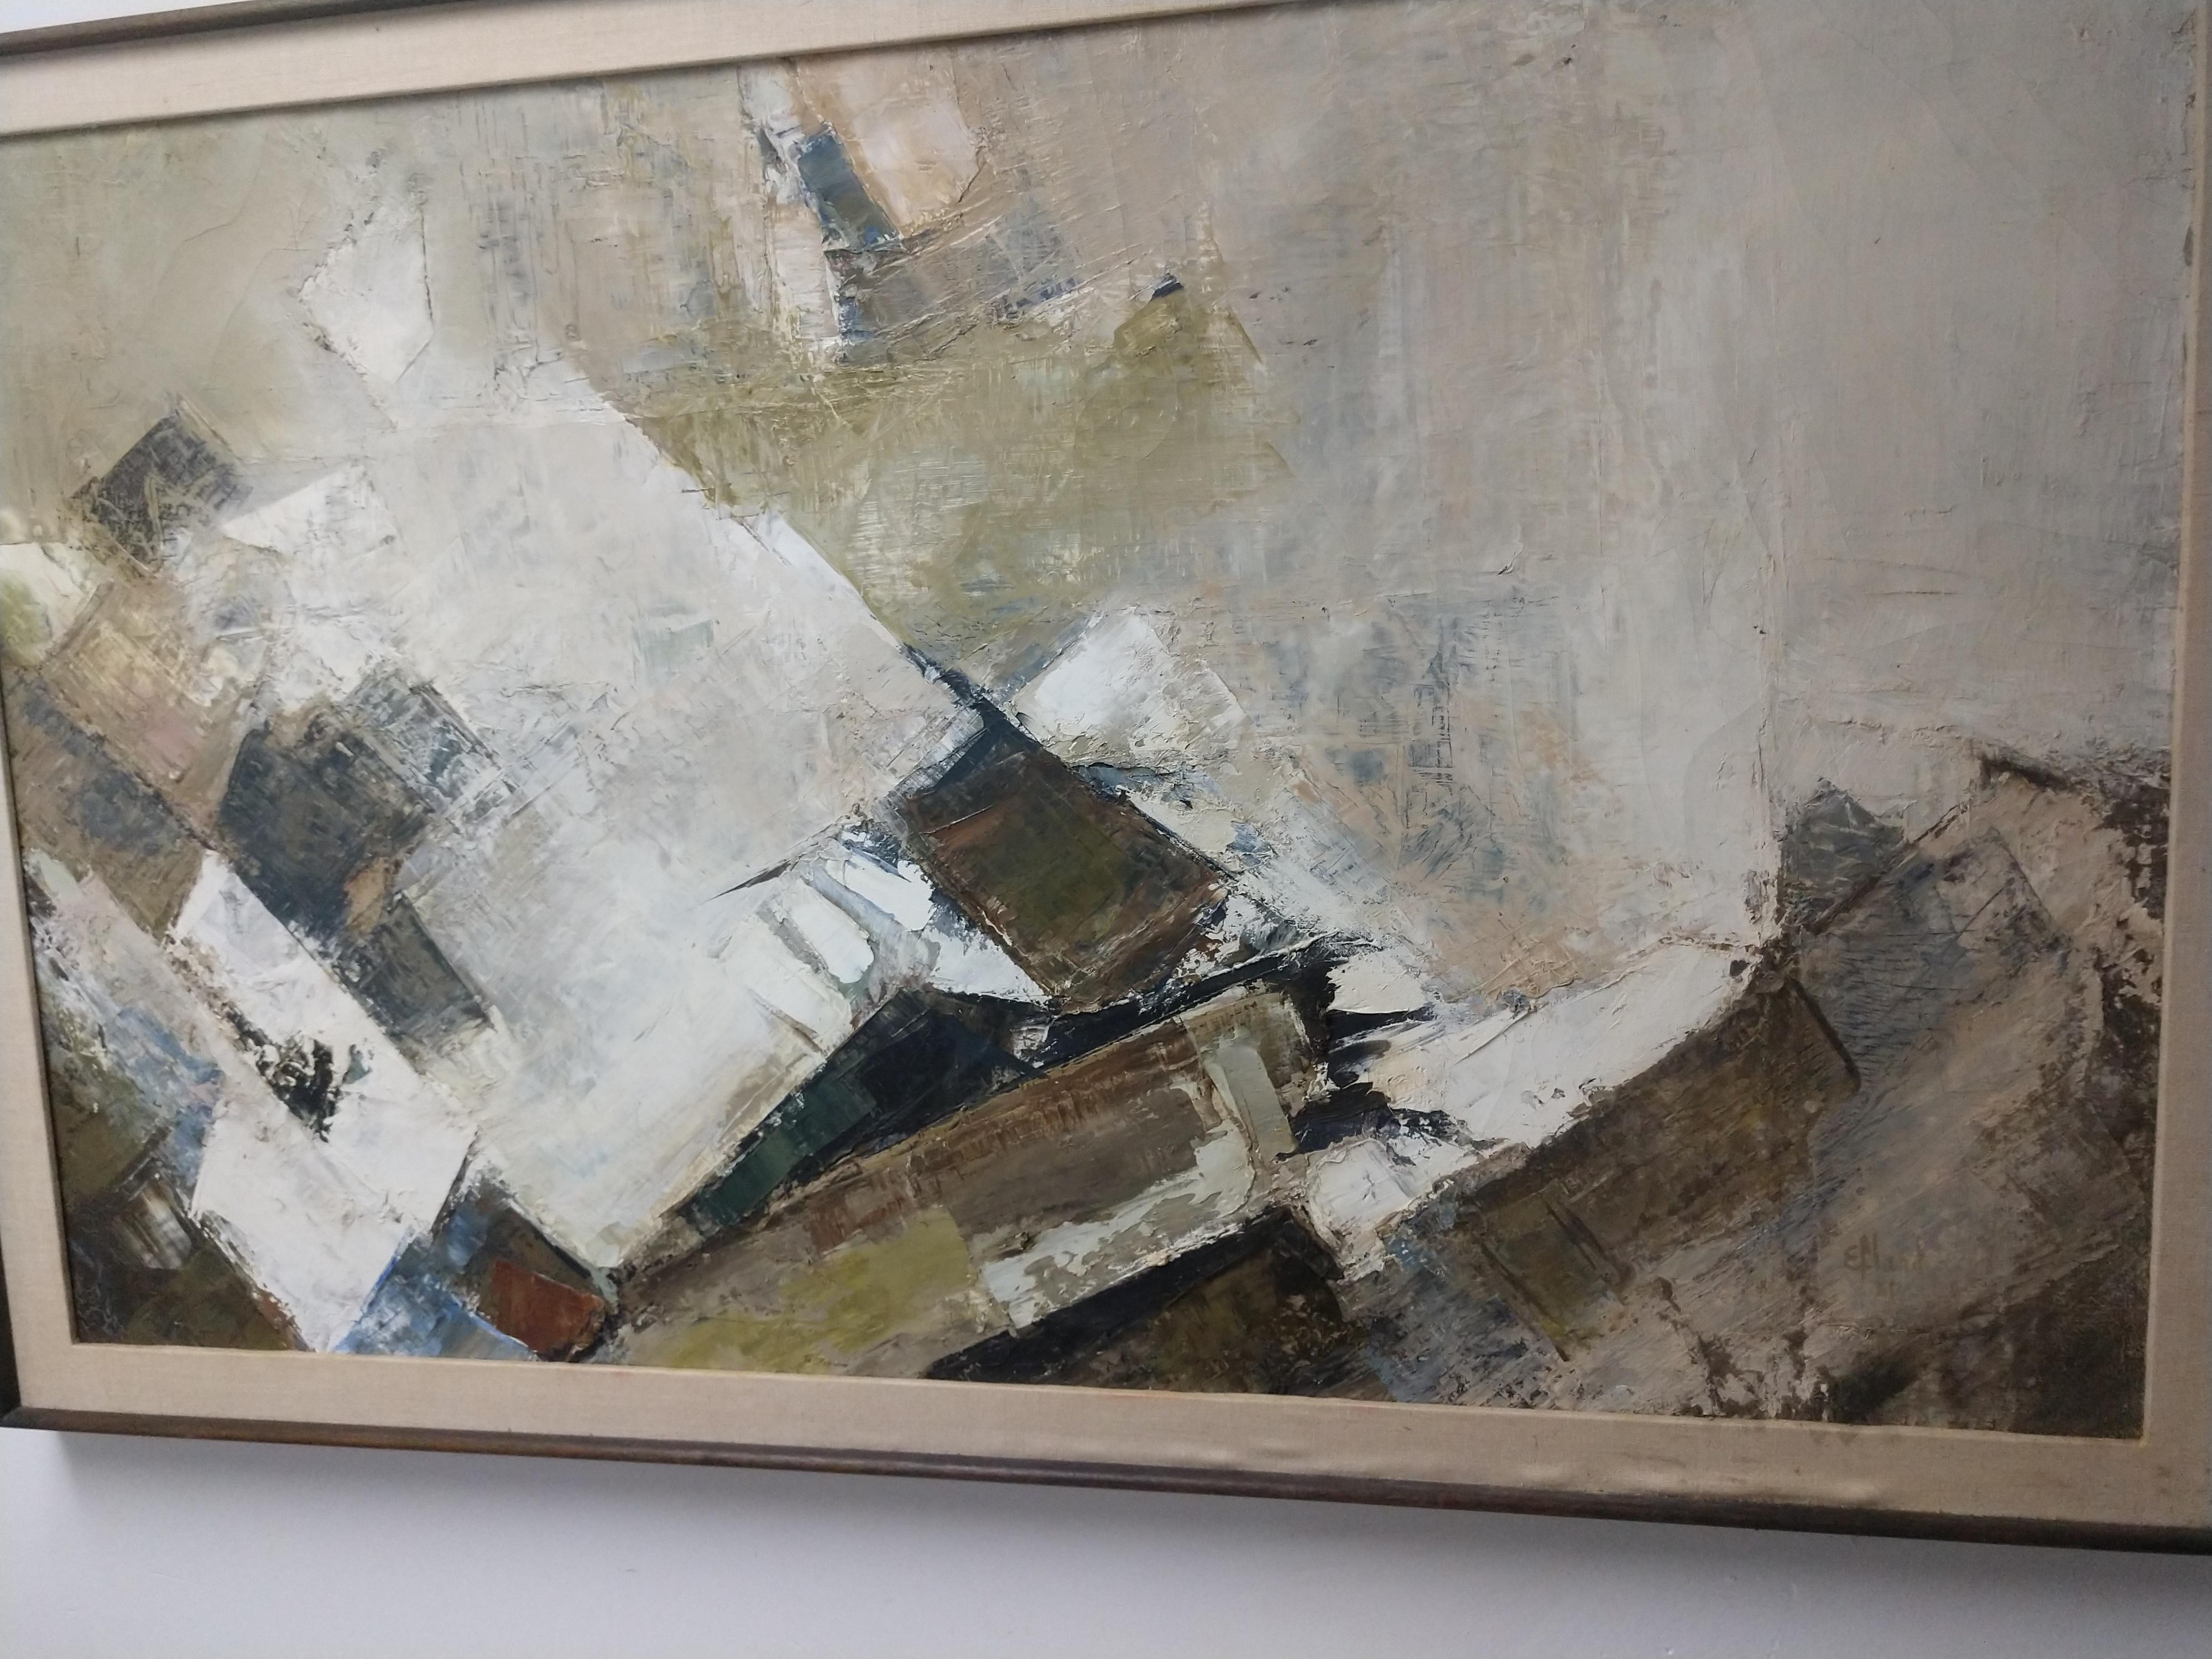 Beautiful abstract with a hint of cubism, and a touch of Cezanne. Wonderful muting of colors using a palette knife. Great texture. Framed in a period 1960s frame. Signed and dated, Efland 1961. Actual canvas size is 26 x 41.5.